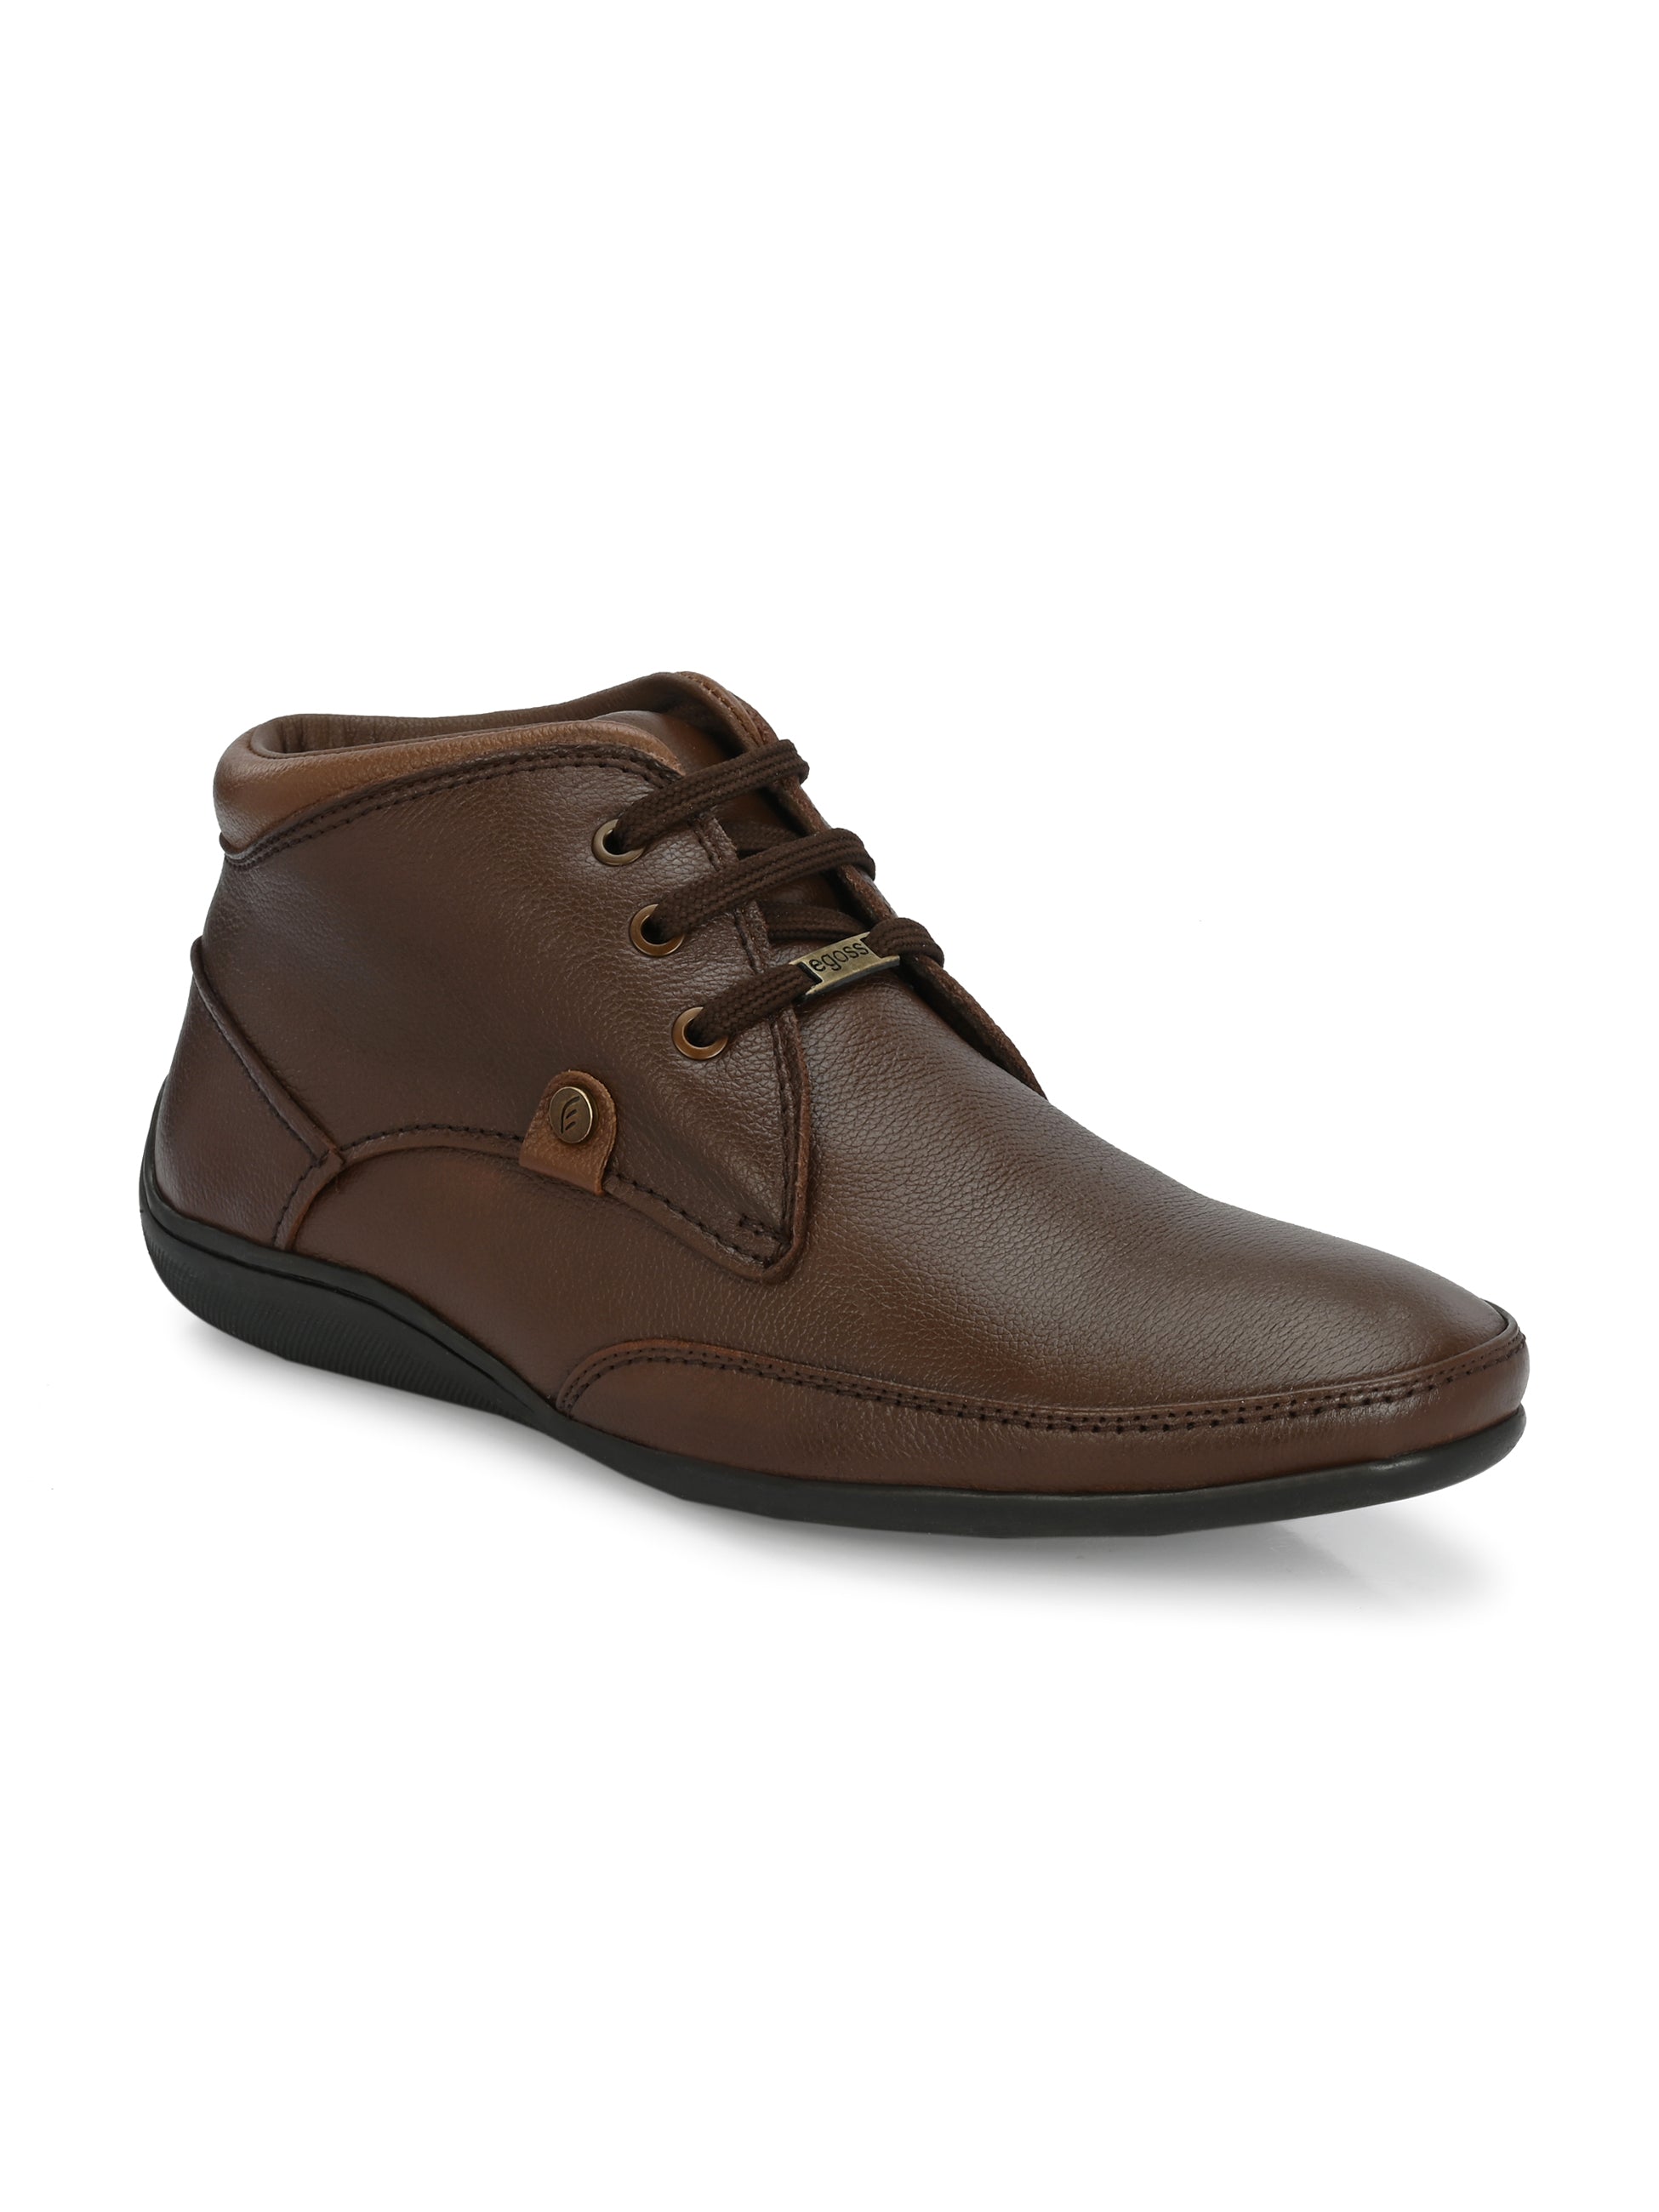 Egoss Leather Casual Boots For Men